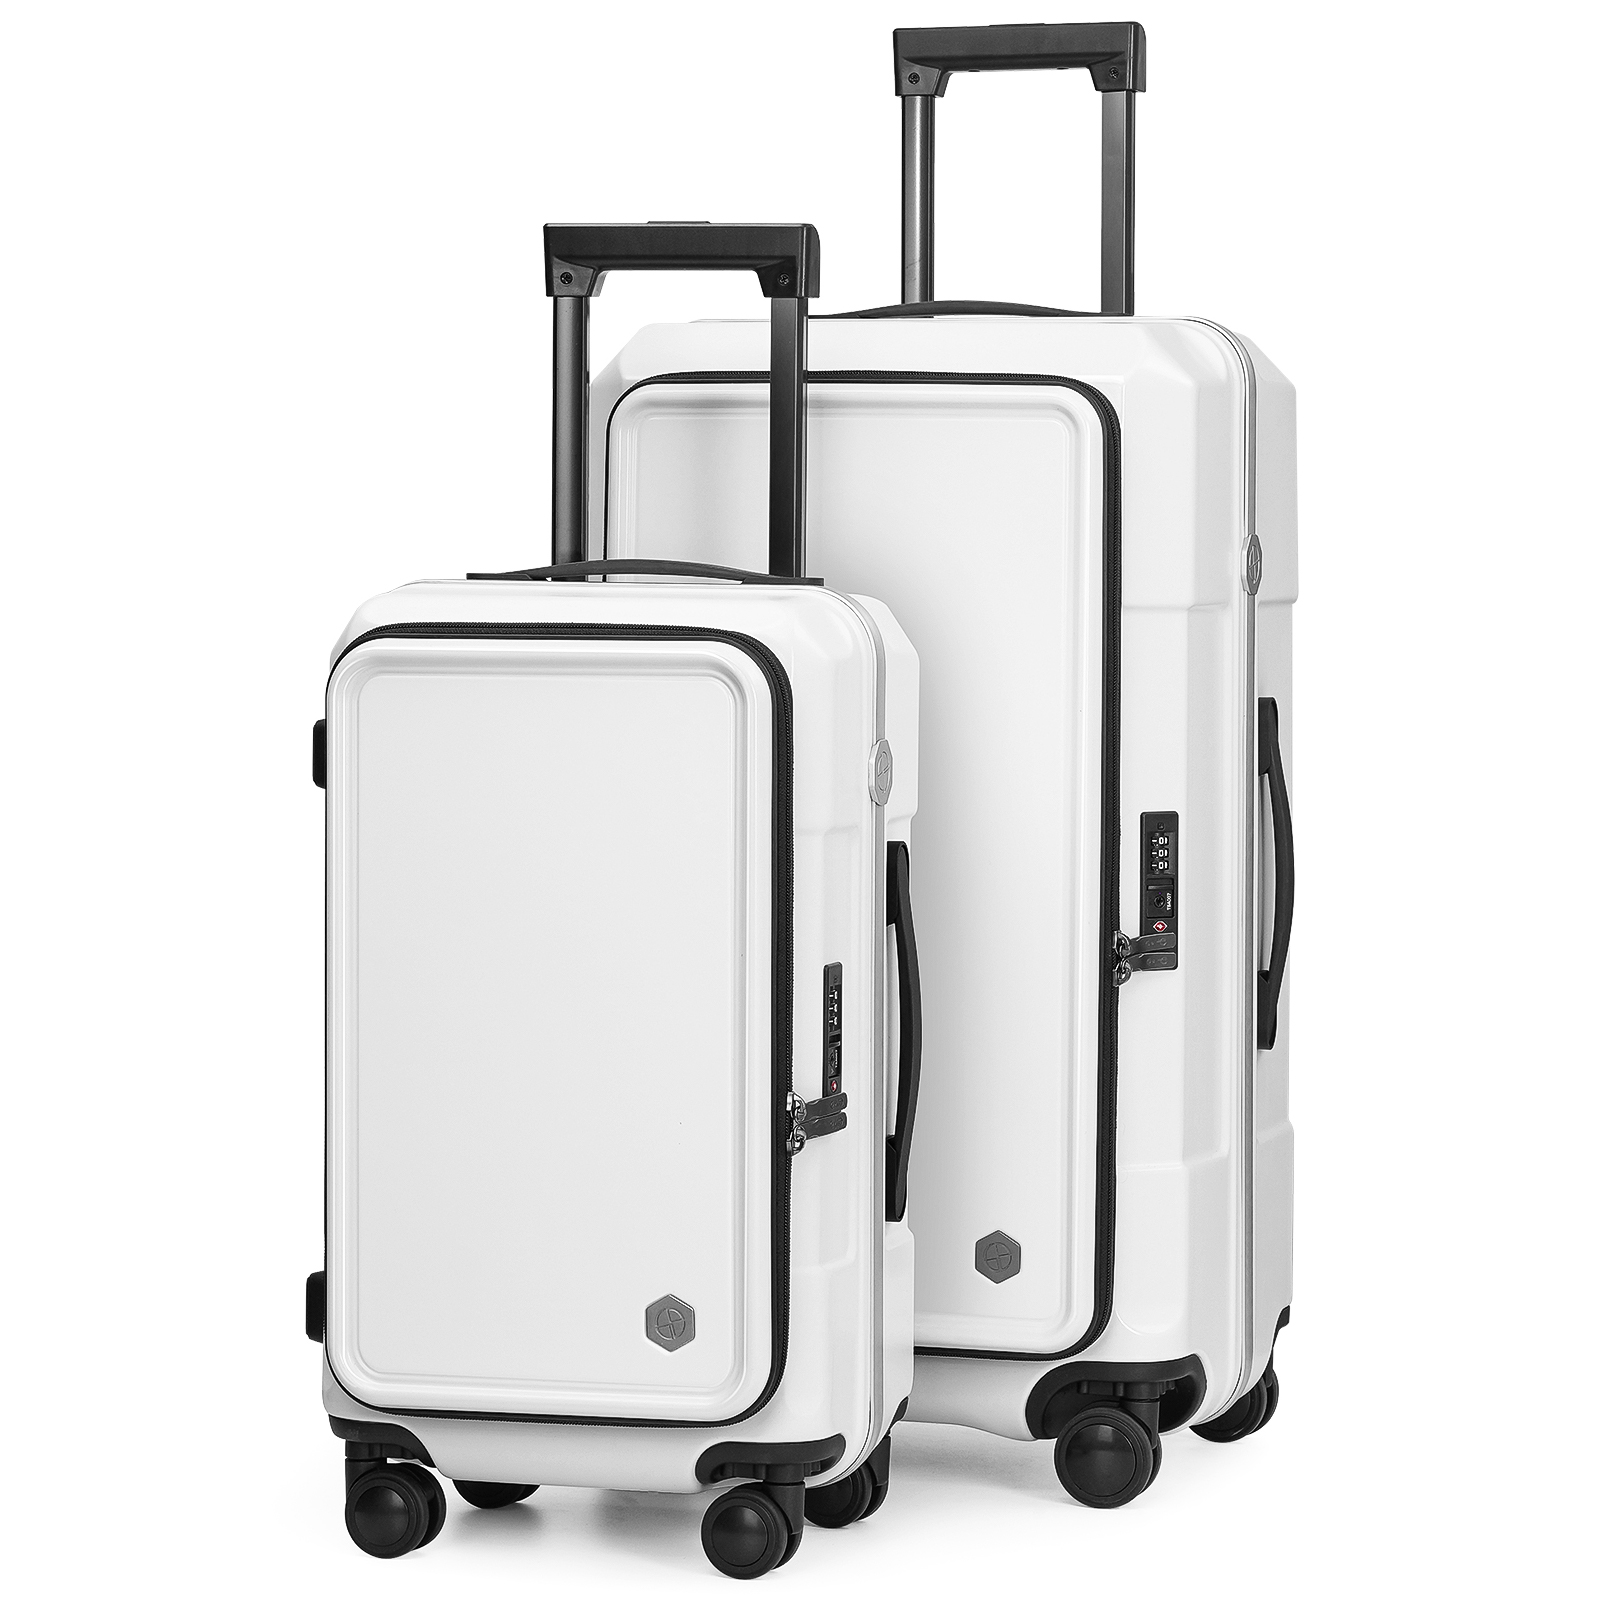 Coolife Luggage Carry On Spinner Suitcase Set with Pocket Compartment Weekend Bag Hardside Trunk Aluminum Type